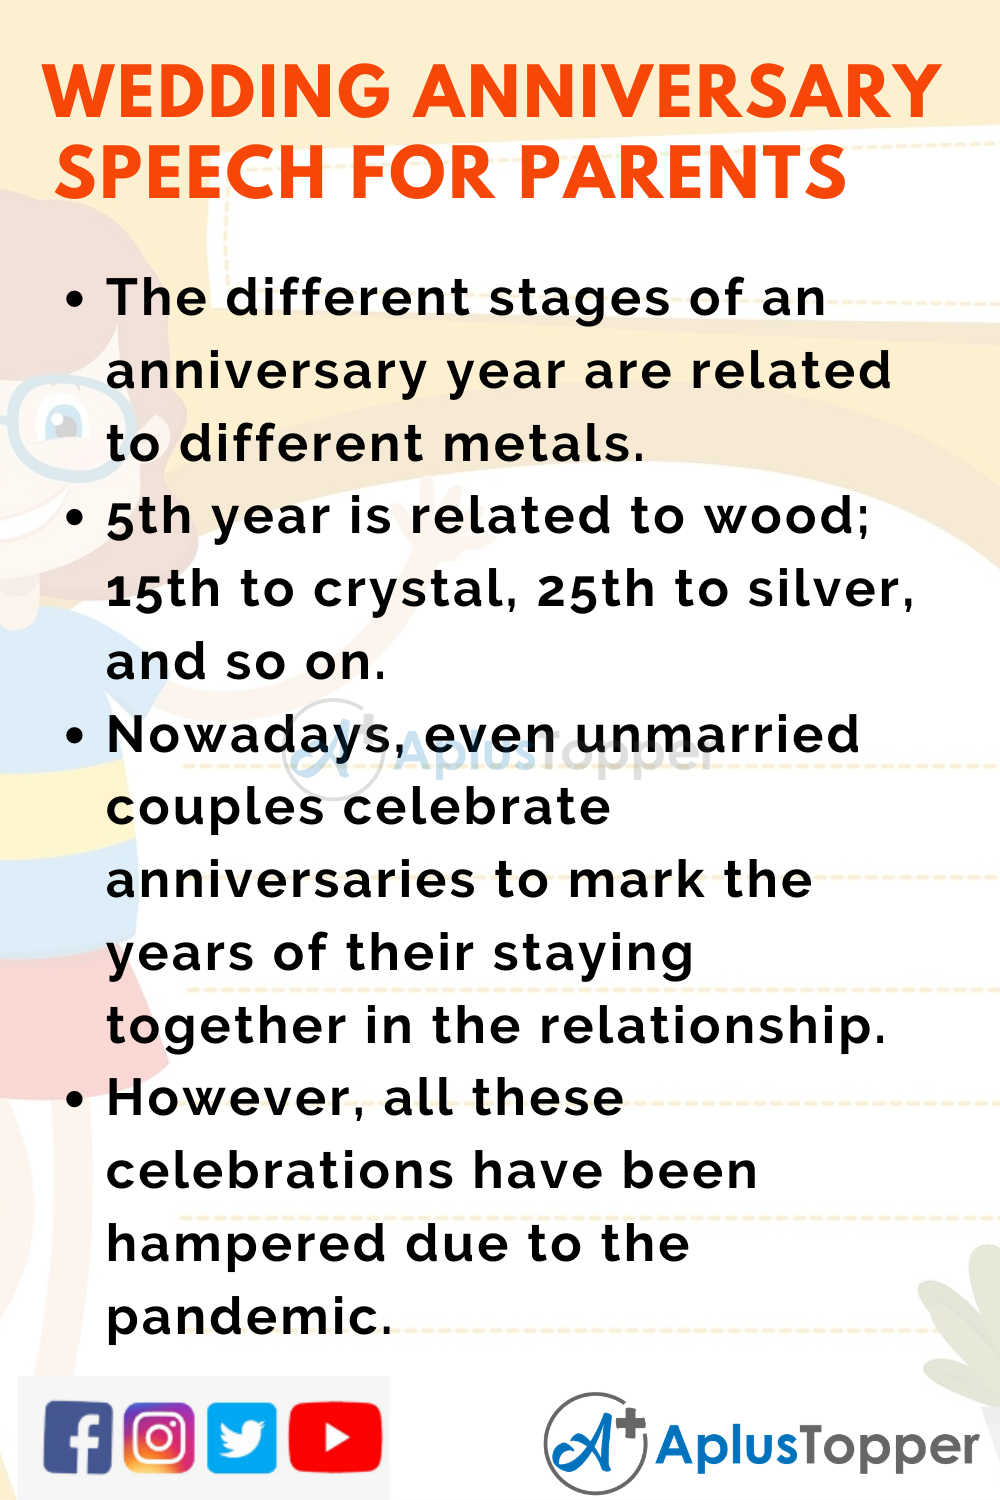 Short Speech On Wedding Anniversary for Parents 150 Words in English